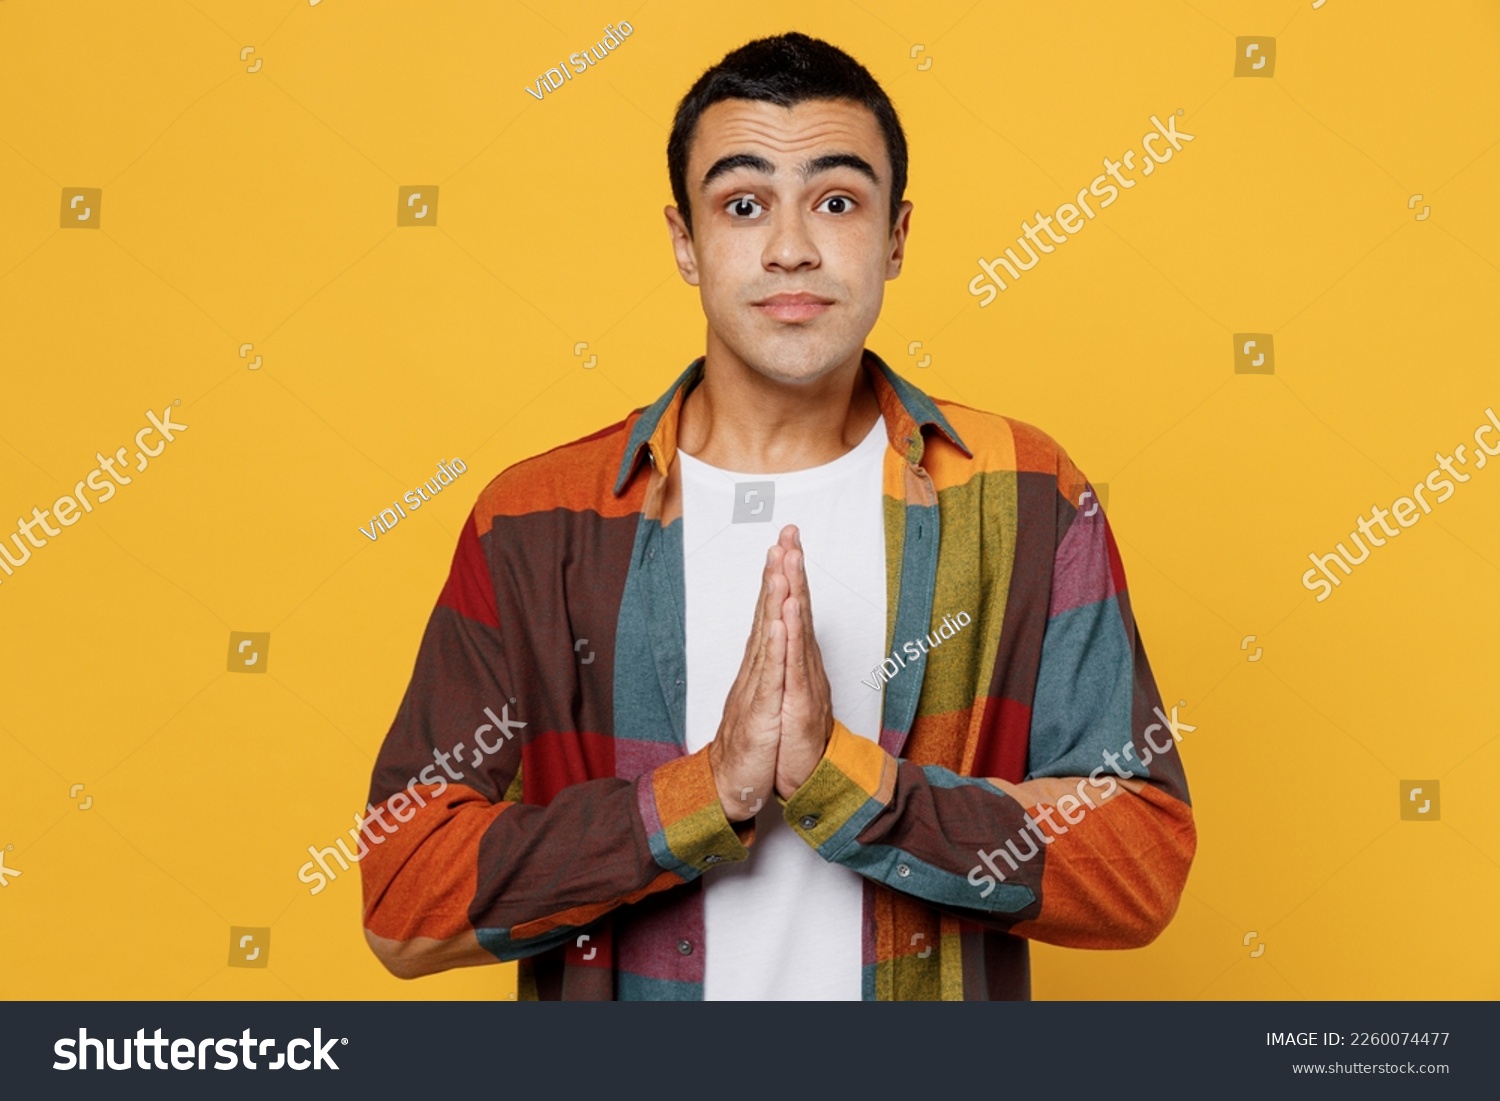 Young middle eastern man 20s wear casual shirt white t-shirt hold hands folded in prayer gesture, begging about something isolated on plain yellow background studio portrait People lifestyle concept #2260074477